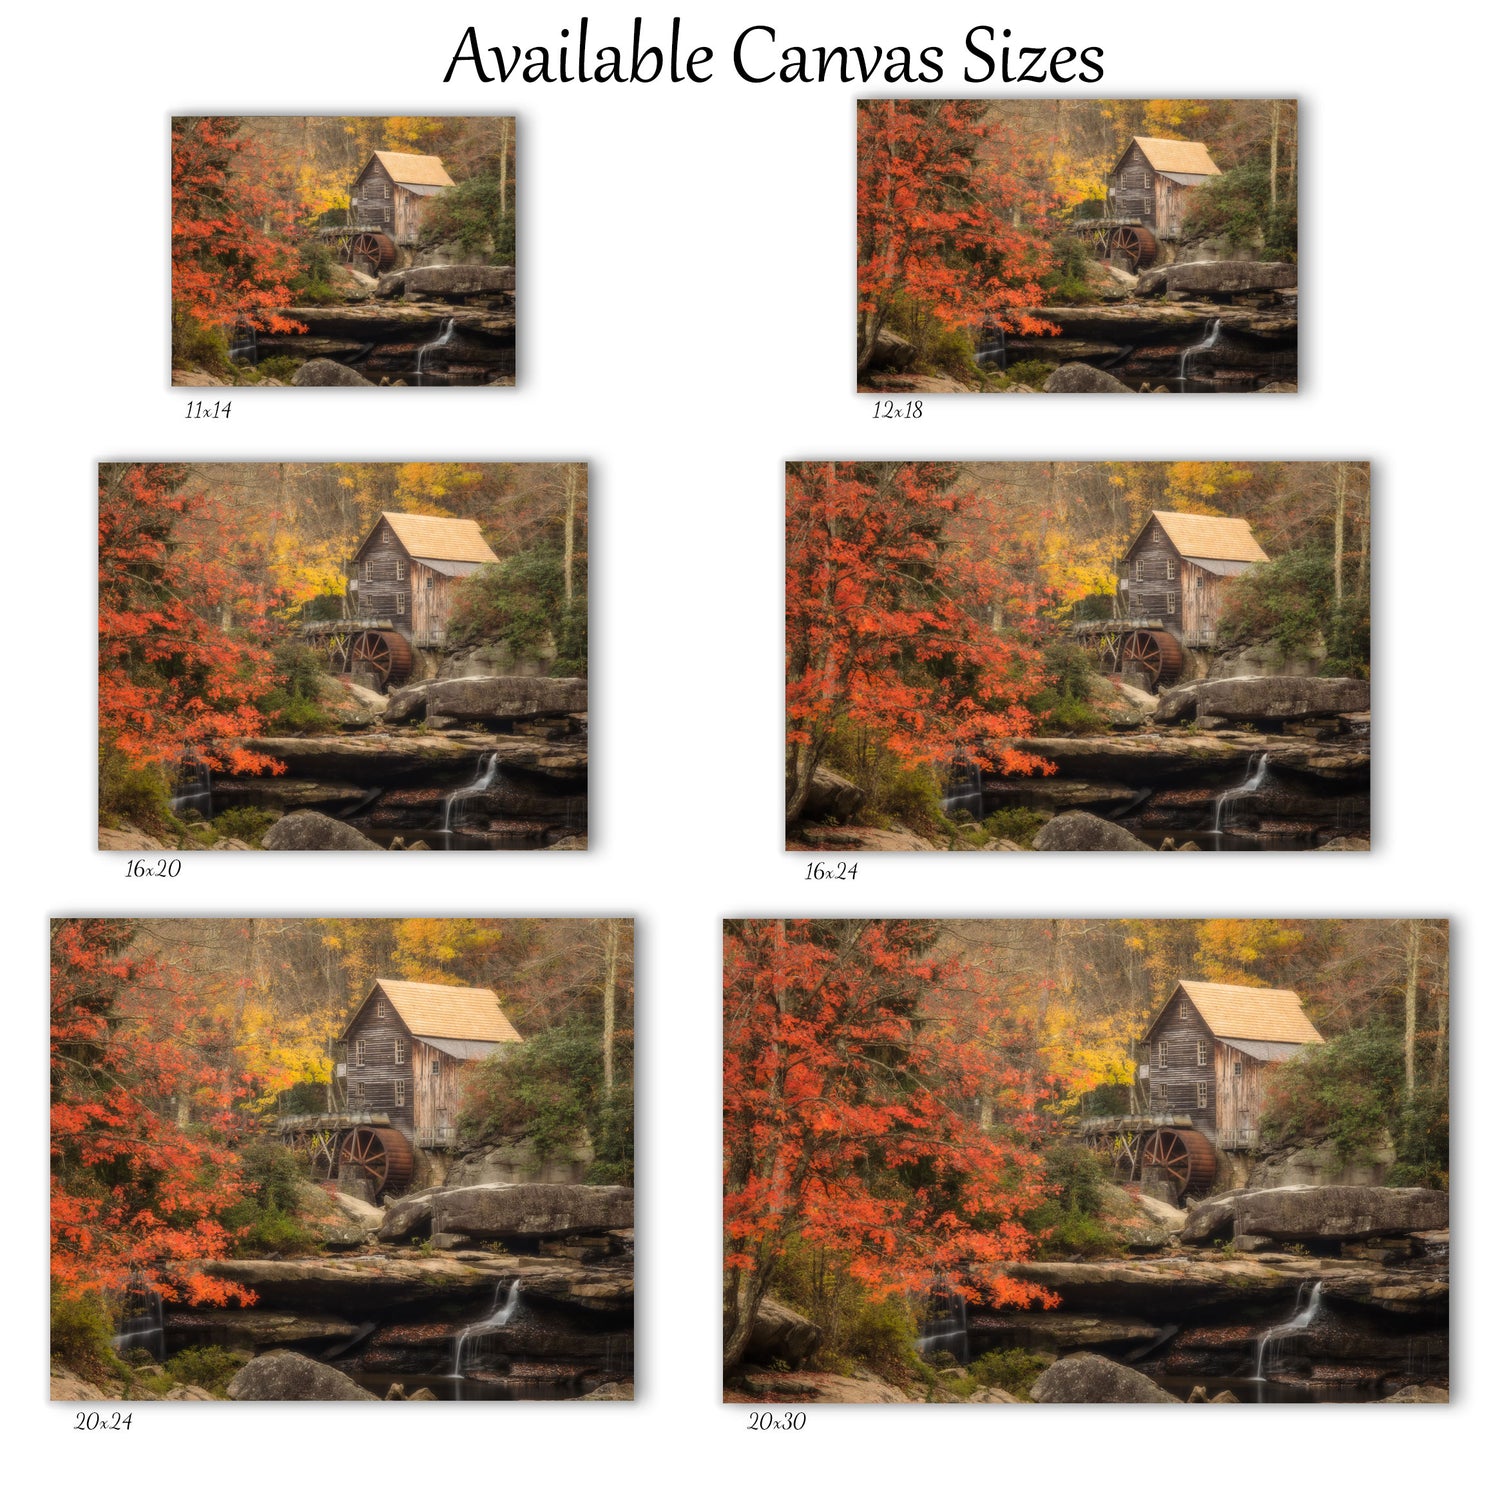 Visual representation of the Glade Creek Grist Mill canvas wall art print sizes available: 11x14, 12x18, 16x20, 16x24, 20x24 and 20x30.